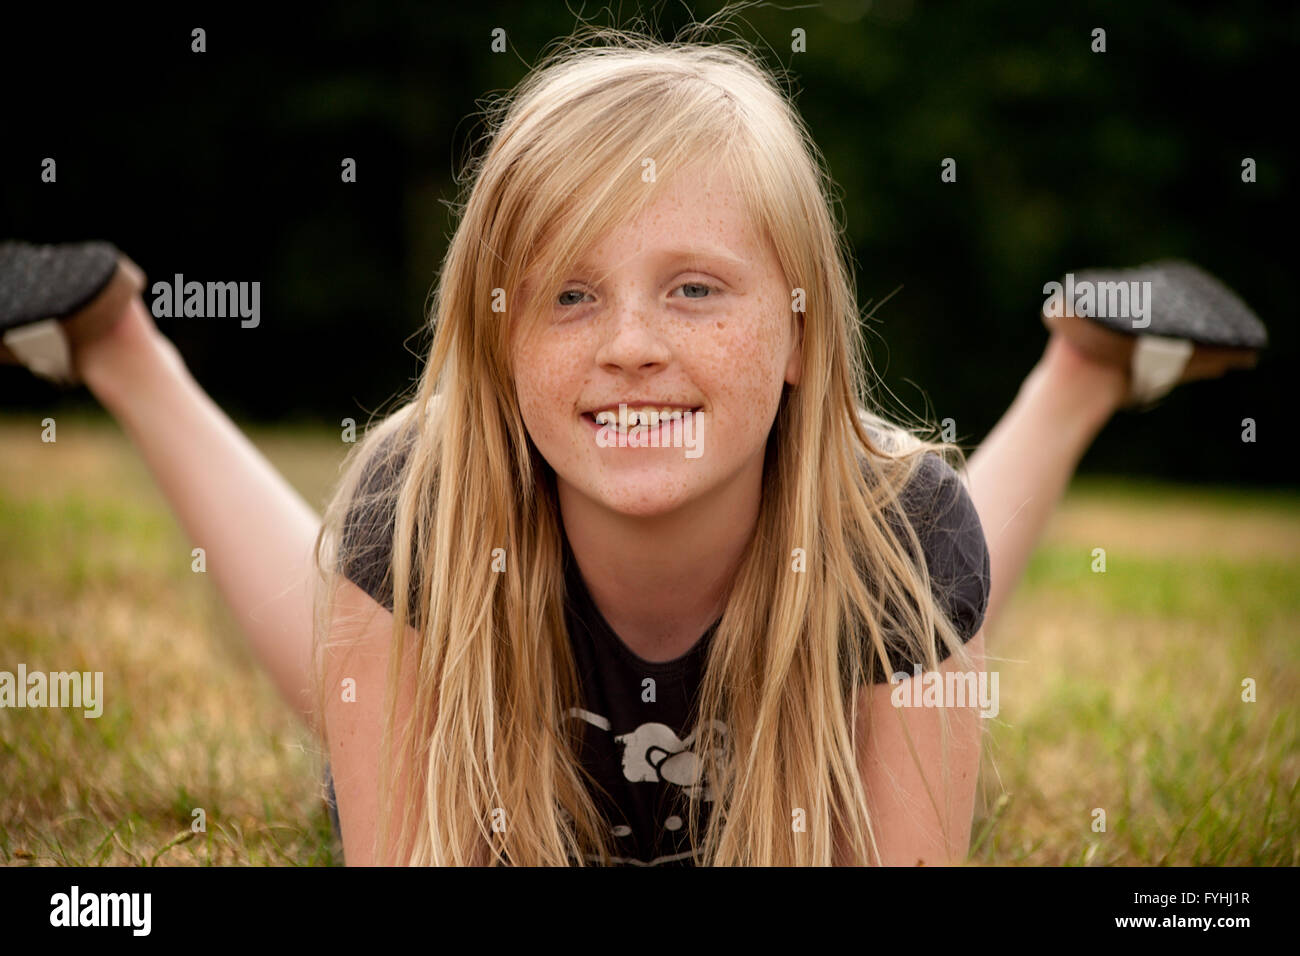 Blond teen with freckles Stock Photo